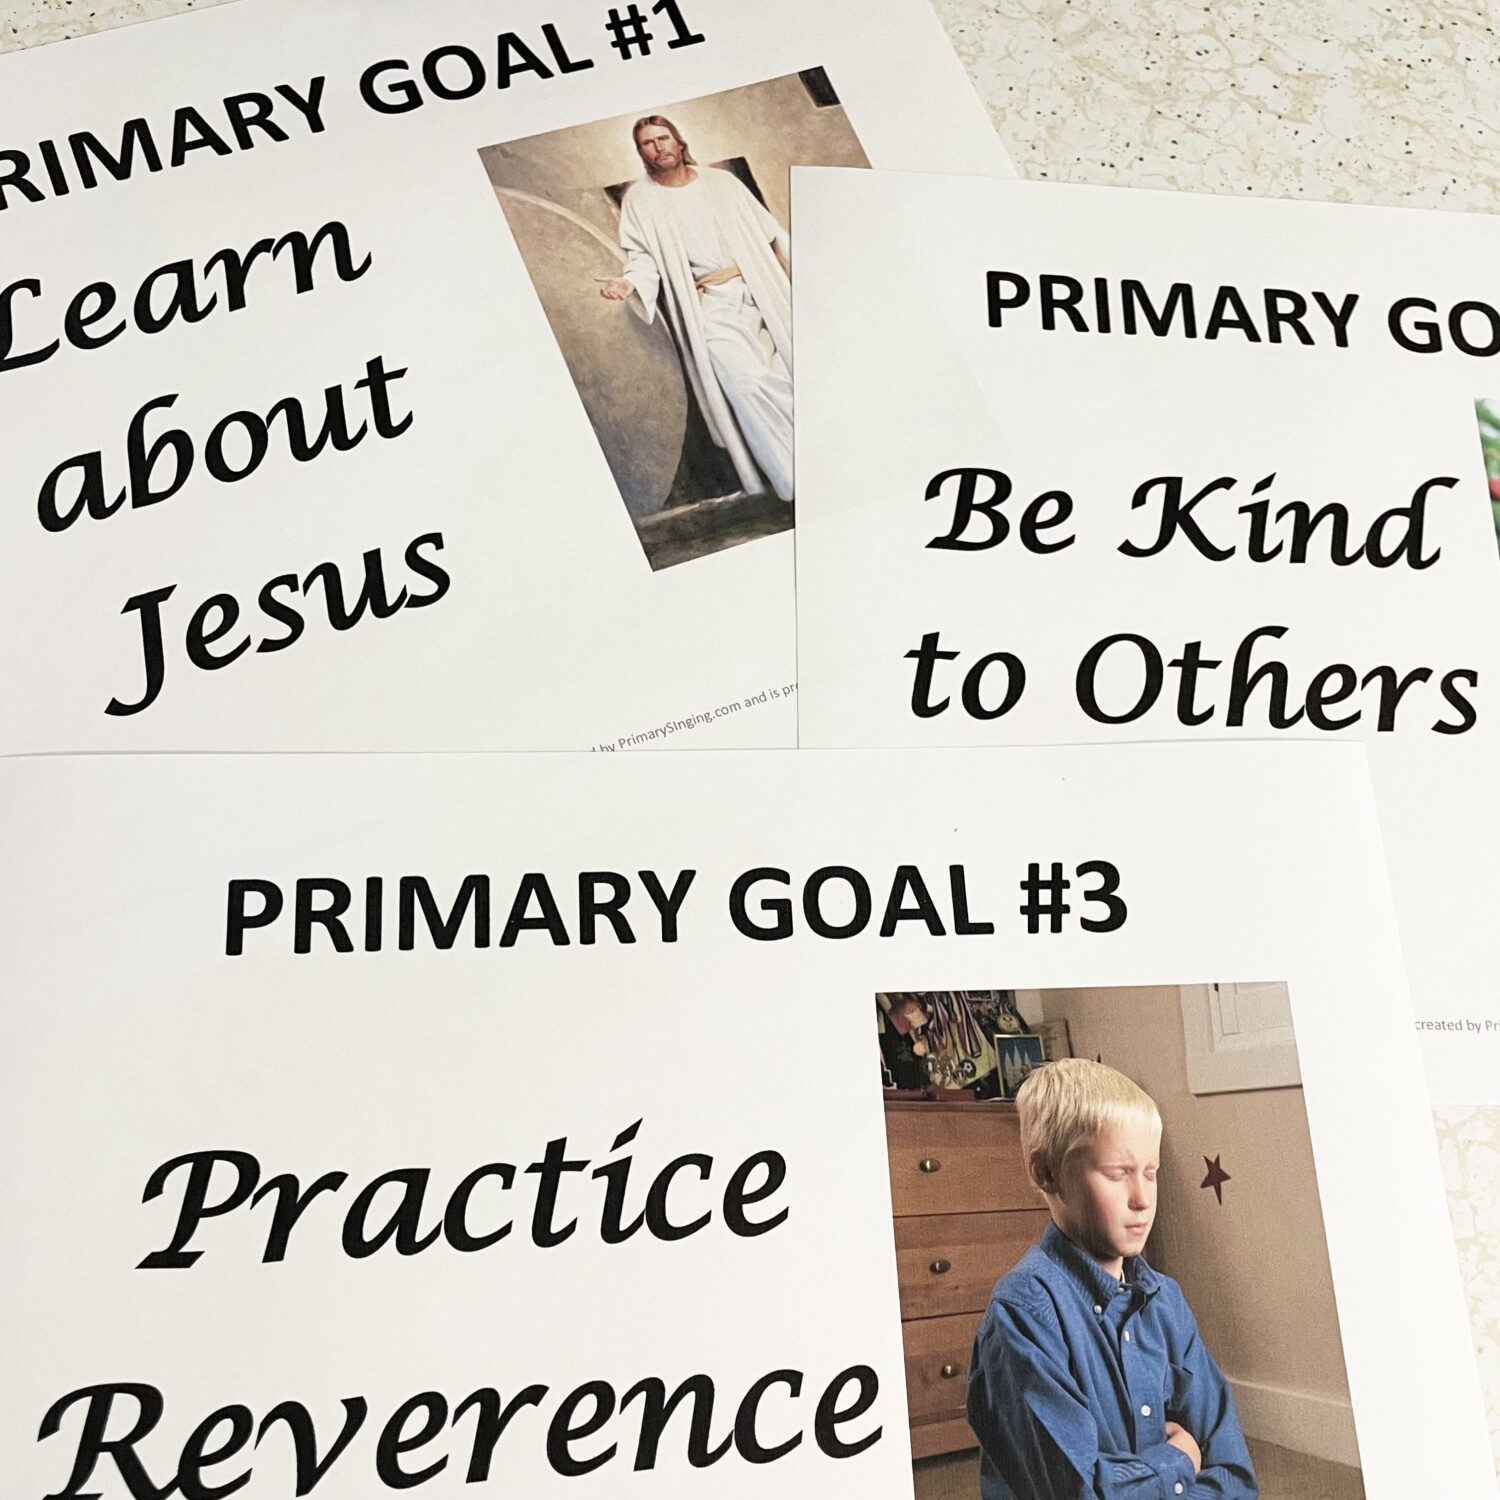 Fun Primary New Years Goals activity with printable posters for singing time new years goals for LDS Primary Music Leaders teaching Come Follow Me New Testament.